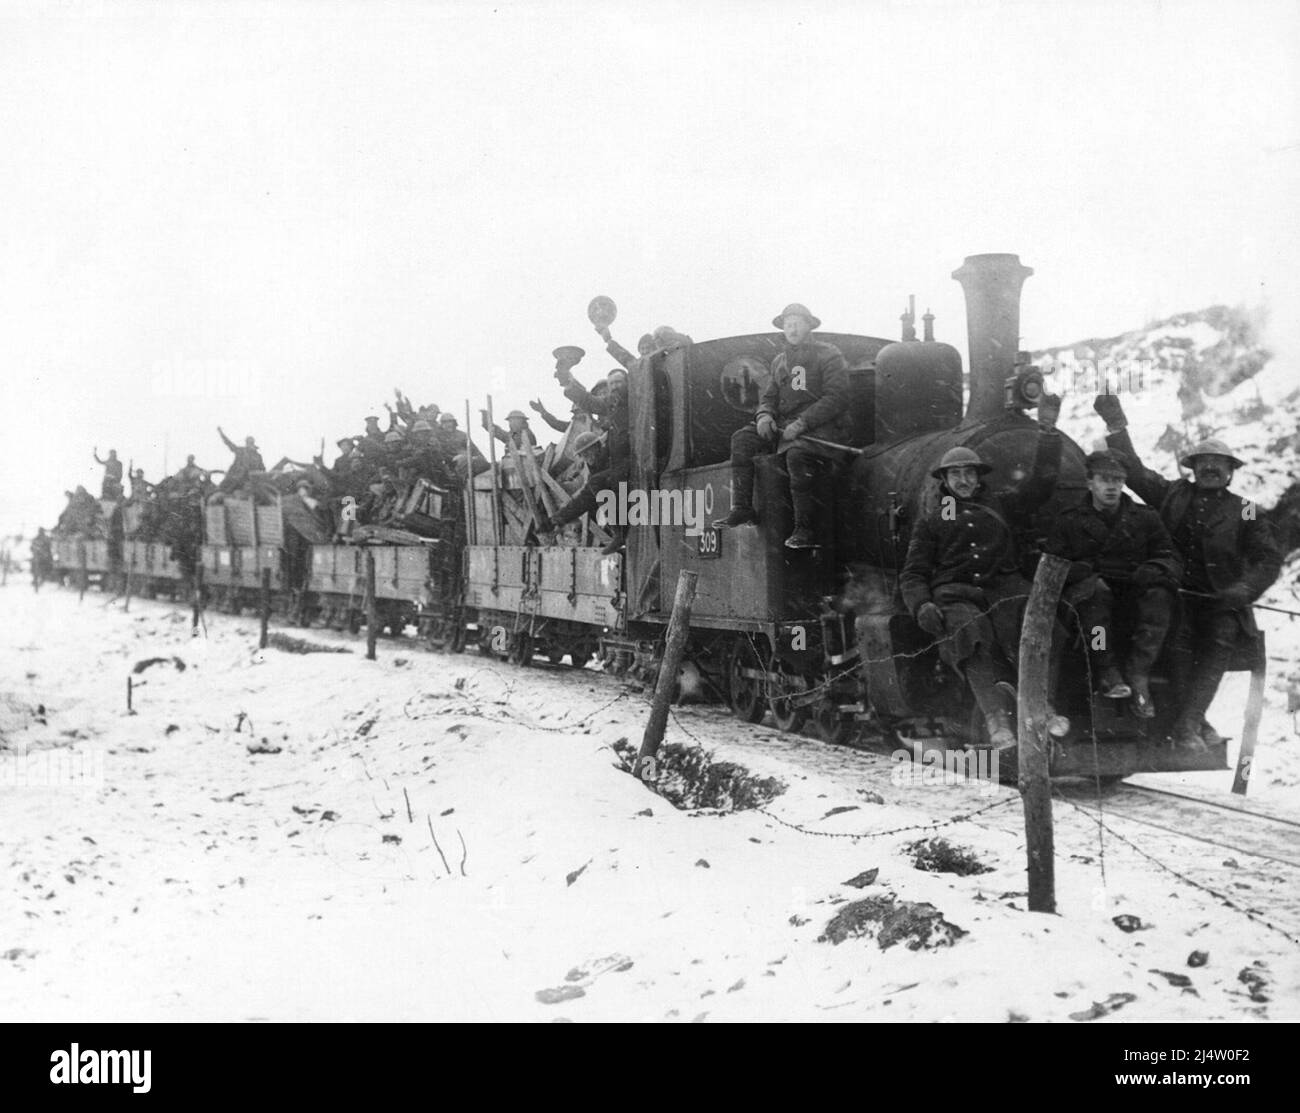 A working party of British troops going up to the forward area by light railway, Elverdinghe, near Ypres, February 1917. Stock Photo